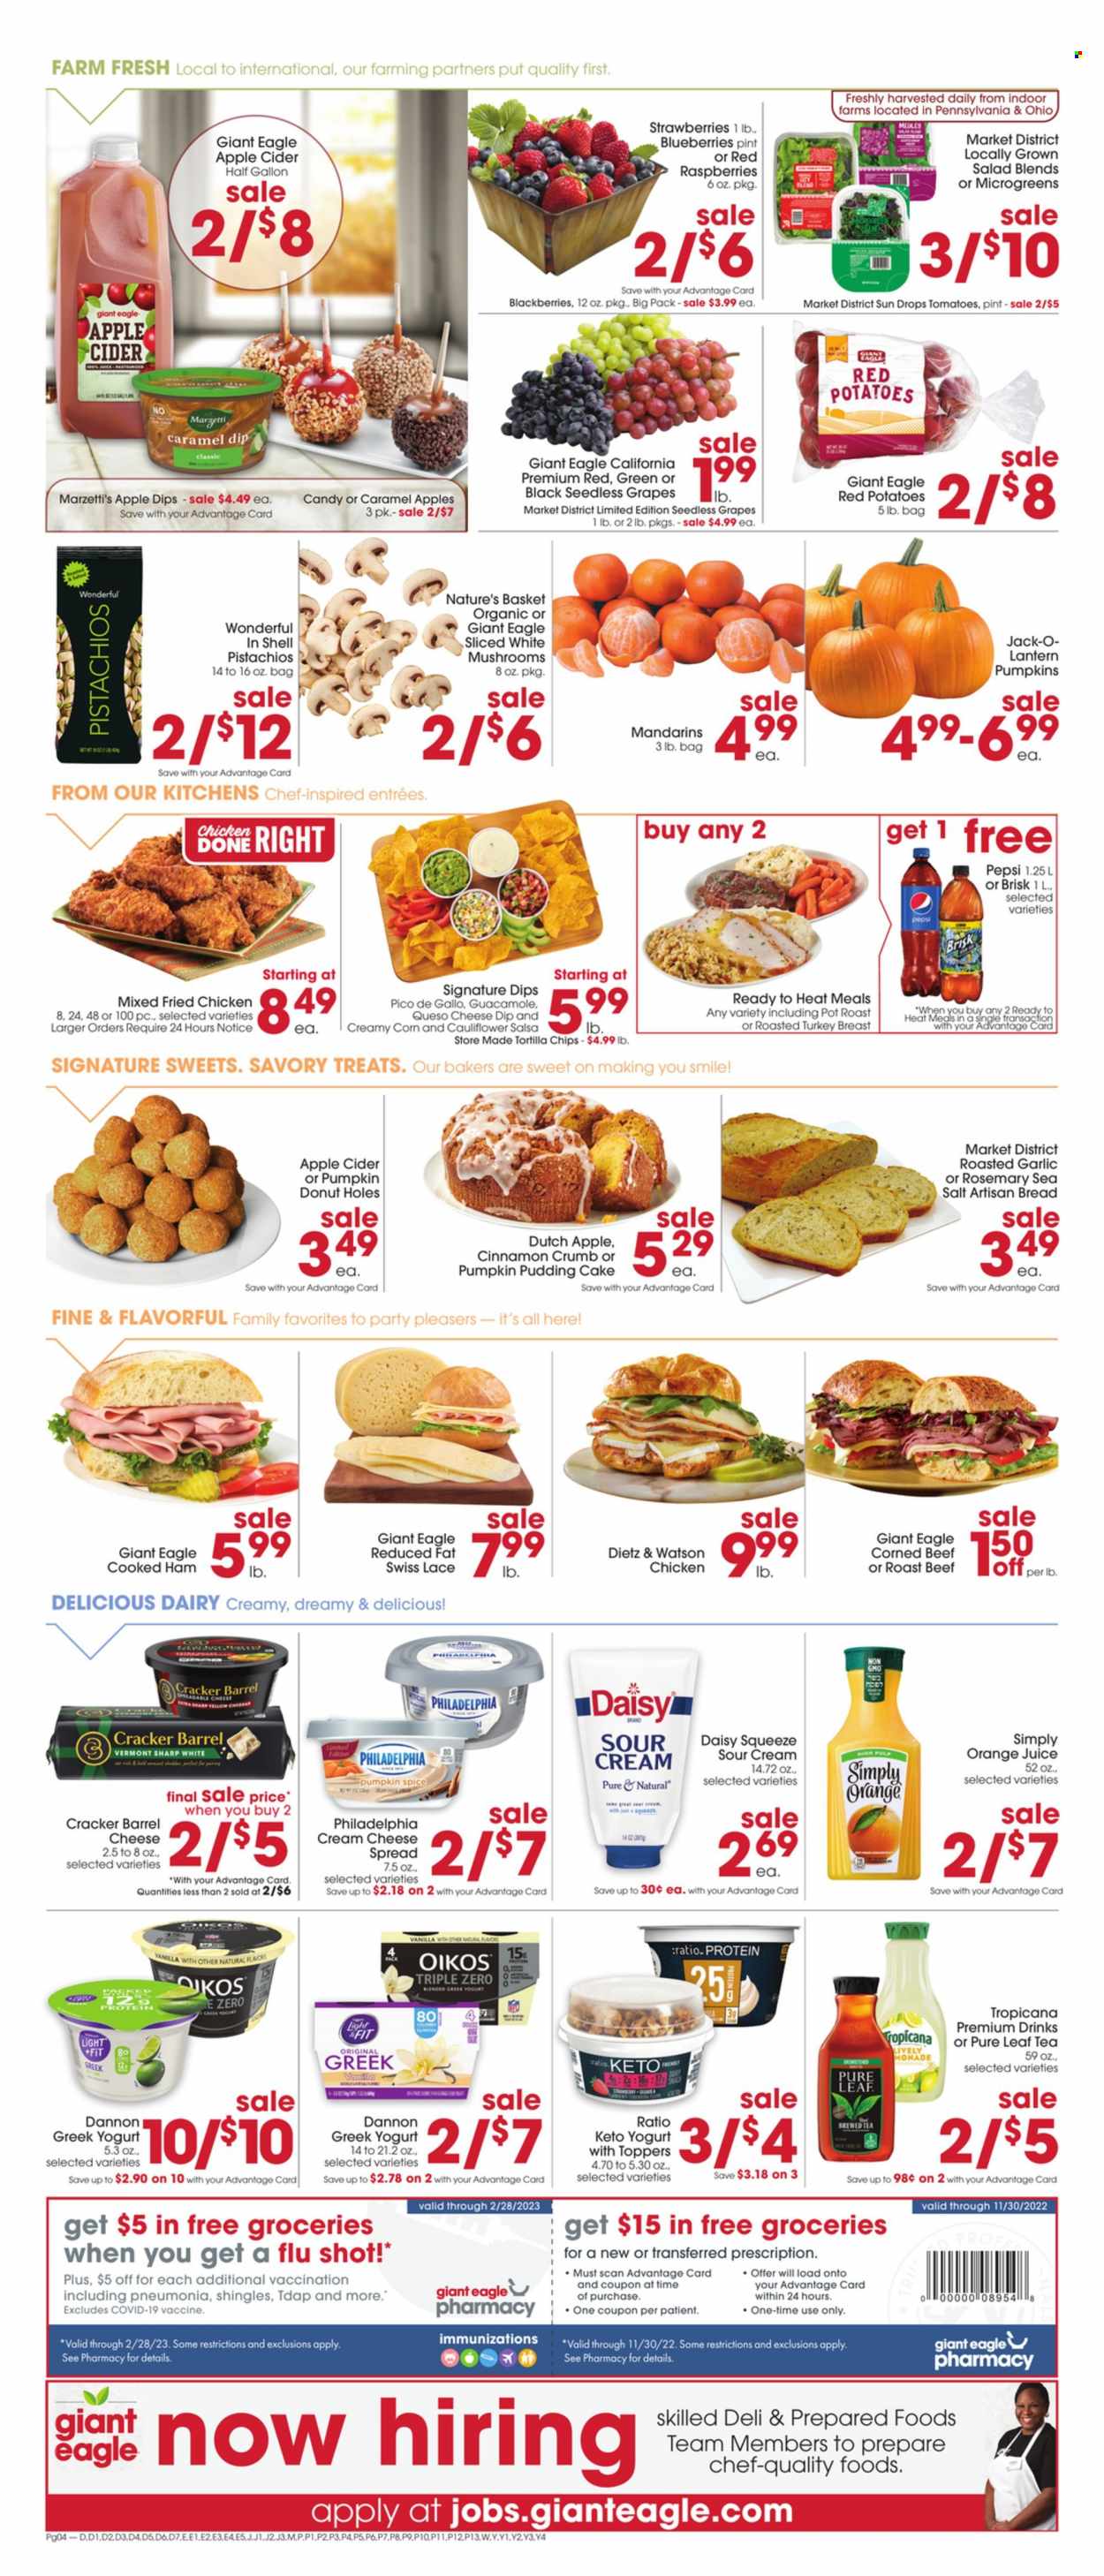 thumbnail - Giant Eagle Flyer - 09/29/2022 - 10/05/2022 - Sales products - mushrooms, bread, cake, donut holes, corn, potatoes, salad, red potatoes, blackberries, blueberries, grapes, mandarines, seedless grapes, strawberries, fried chicken, cooked ham, ham, Dietz & Watson, cheese spread, guacamole, corned beef, cream cheese, Philadelphia, greek yoghurt, yoghurt, Oikos, Dannon, sour cream, crackers, tortilla chips, chips, rosemary, spice, cinnamon, salsa, pistachios, Pepsi, orange juice, juice, tea, Pure Leaf, apple cider, cider, beef meat, roast beef, basket, pot, Bakers, Shell, vitamin D3. Page 2.